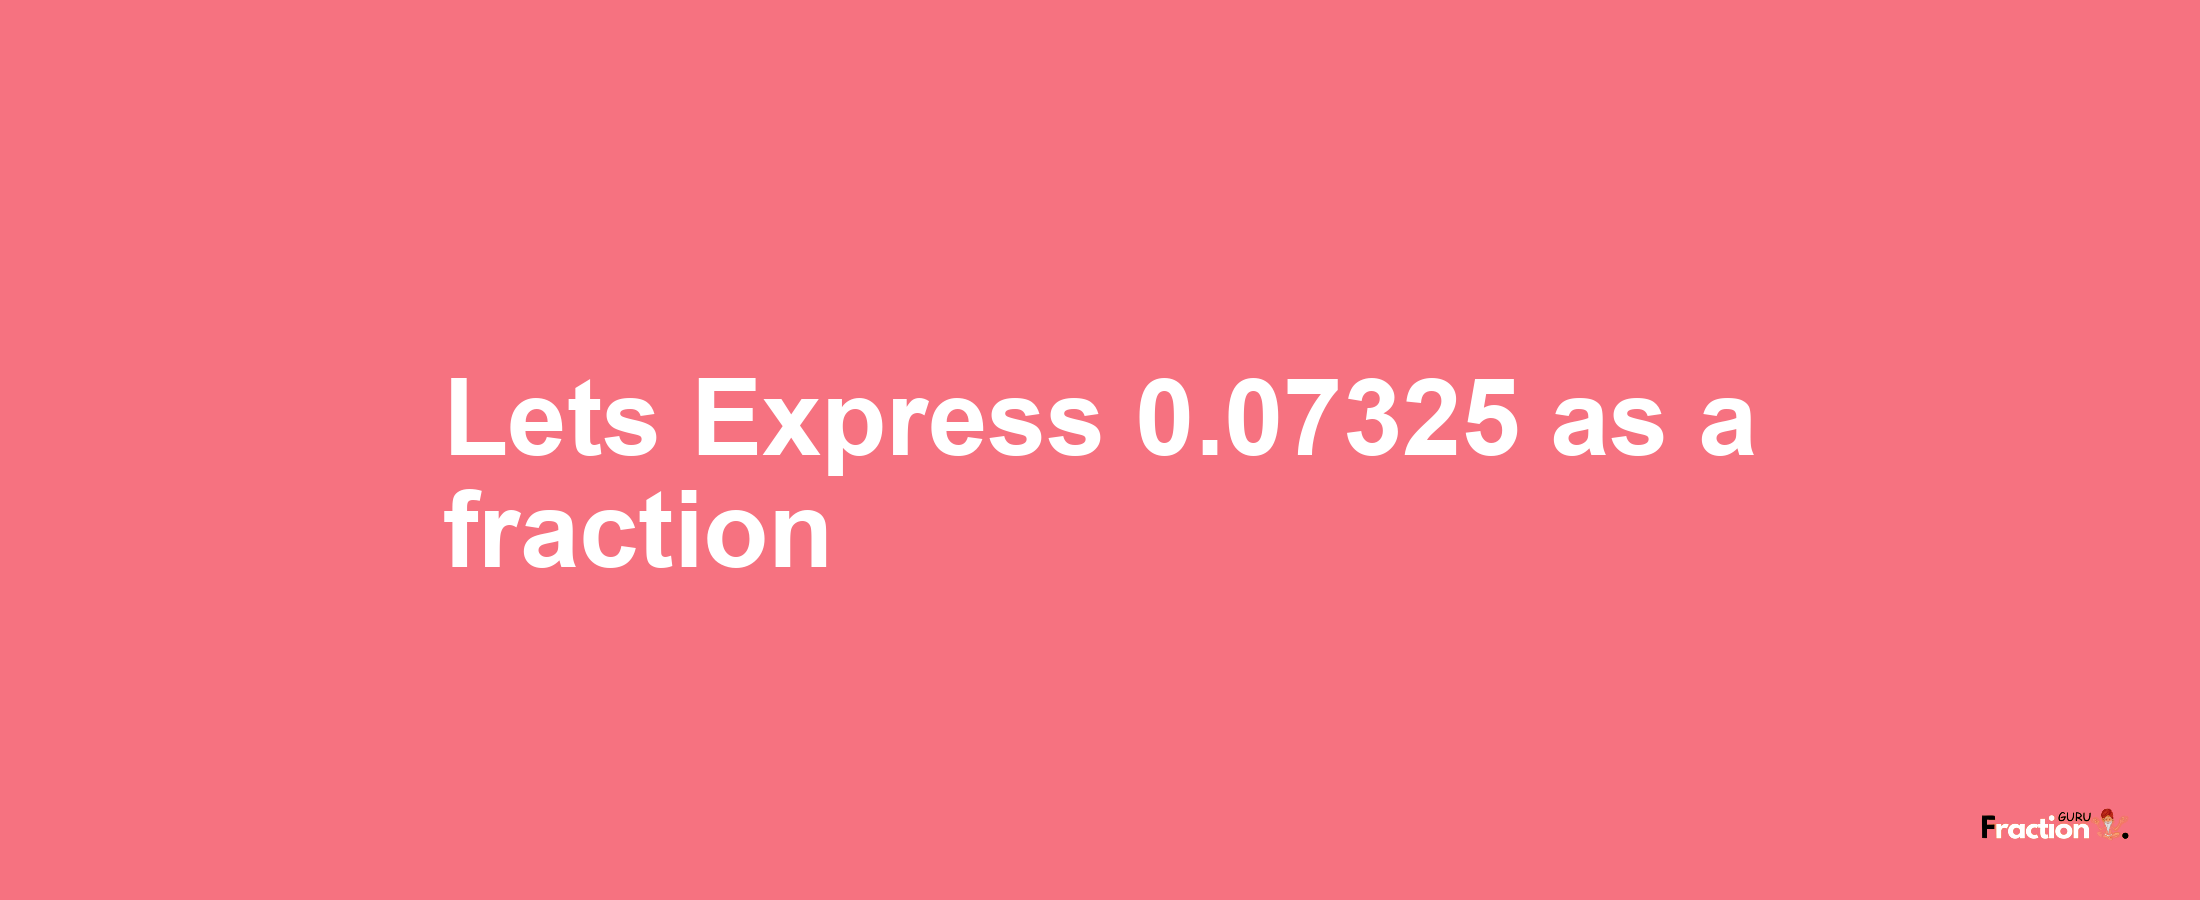 Lets Express 0.07325 as afraction